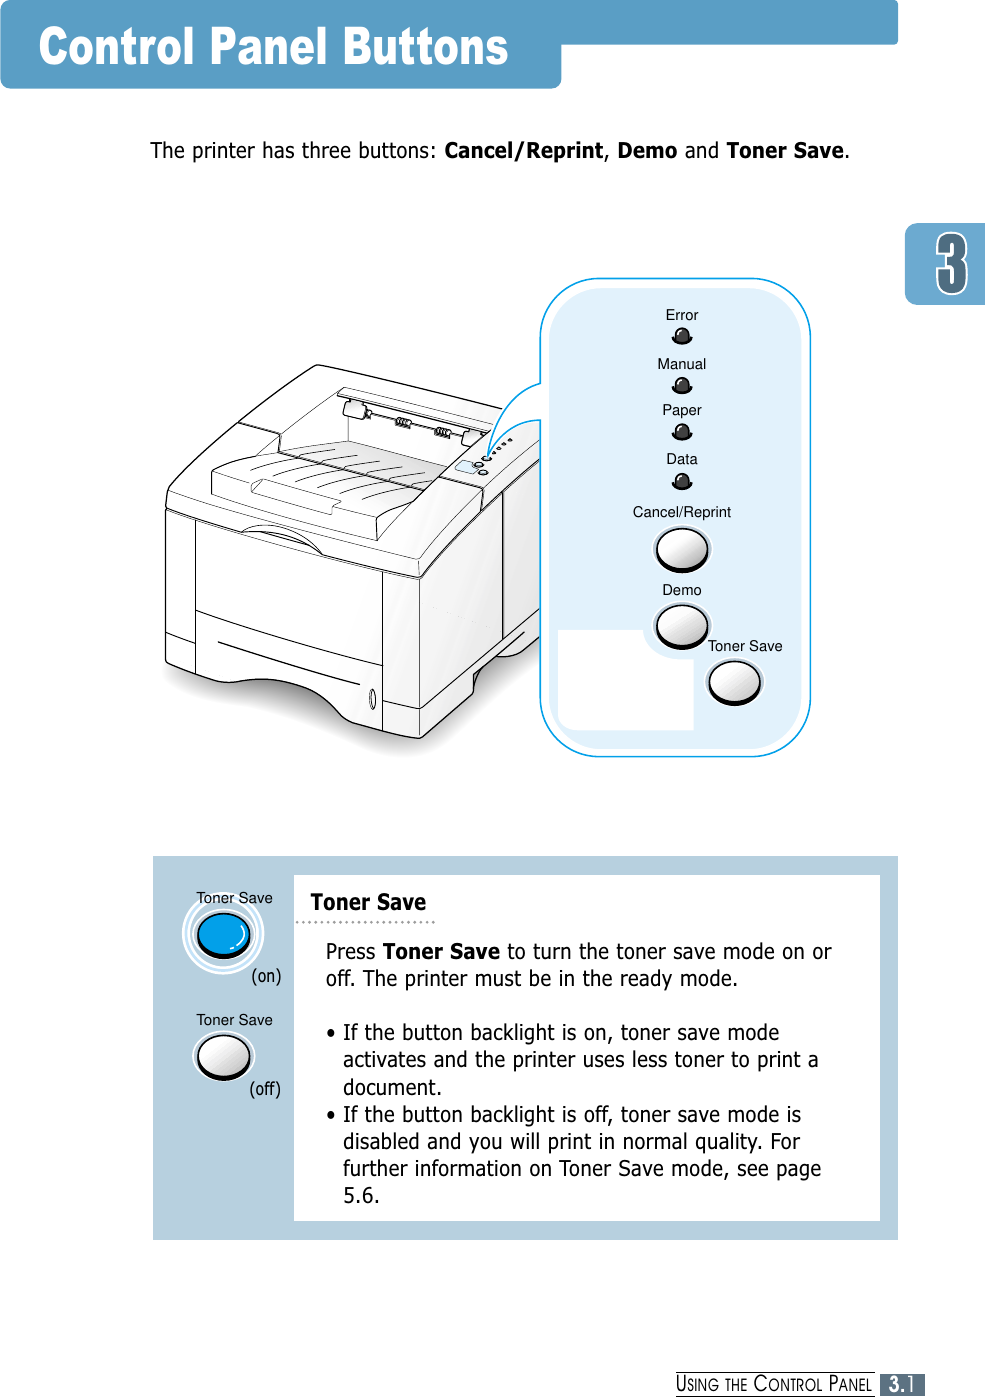 ErrorManualPaperDataCancel/ReprintDemoToner SaveControl Panel ButtonsThe printer has three buttons: Cancel/Reprint, Demo and Toner Save.Toner SaveToner SavePress Toner Save to turn the toner save mode on oroff. The printer must be in the ready mode.• If the button backlight is on, toner save modeactivates and the printer uses less toner to print adocument.• If the button backlight is off, toner save mode isdisabled and you will print in normal quality. Forfurther information on Toner Save mode, see page5.6.(on)(off)Toner Save3.1USING THE CONTROL PANEL